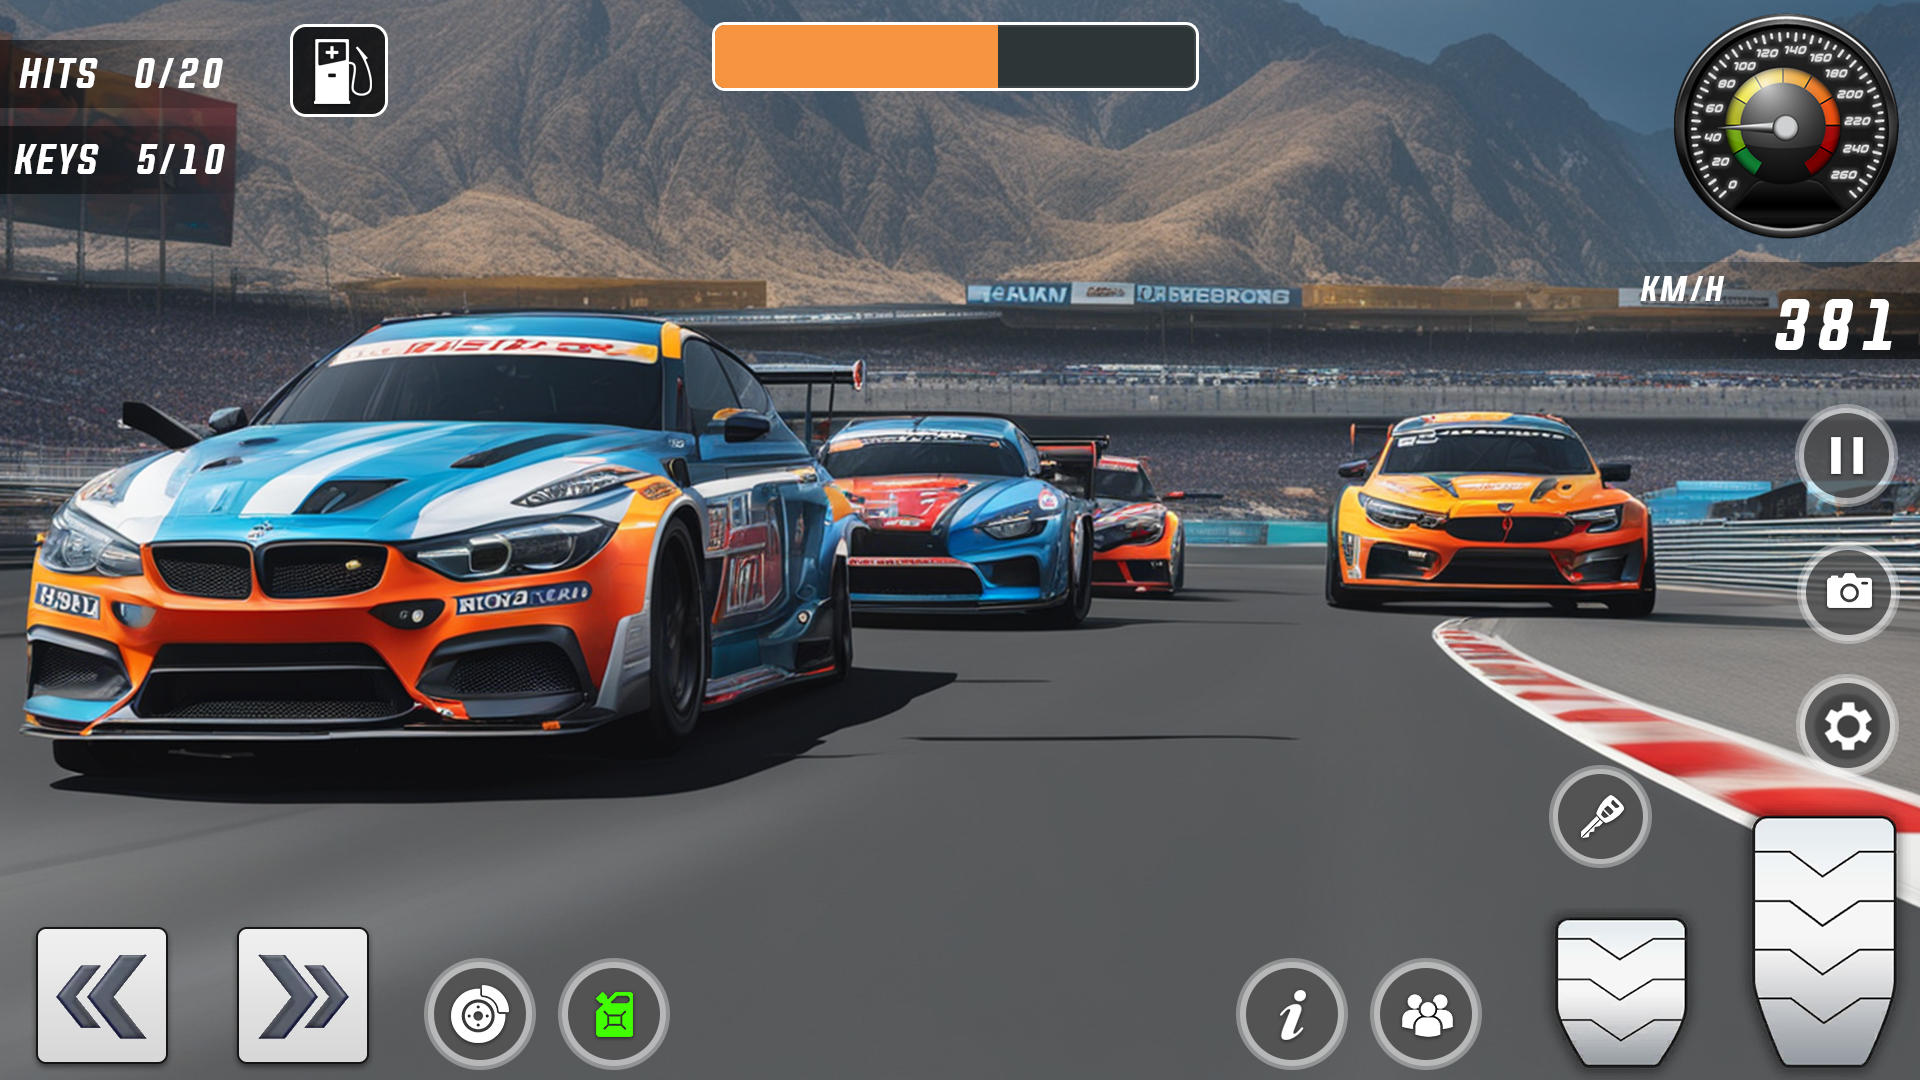 Drift Pro Car Racing Games 3D for Android - Free App Download